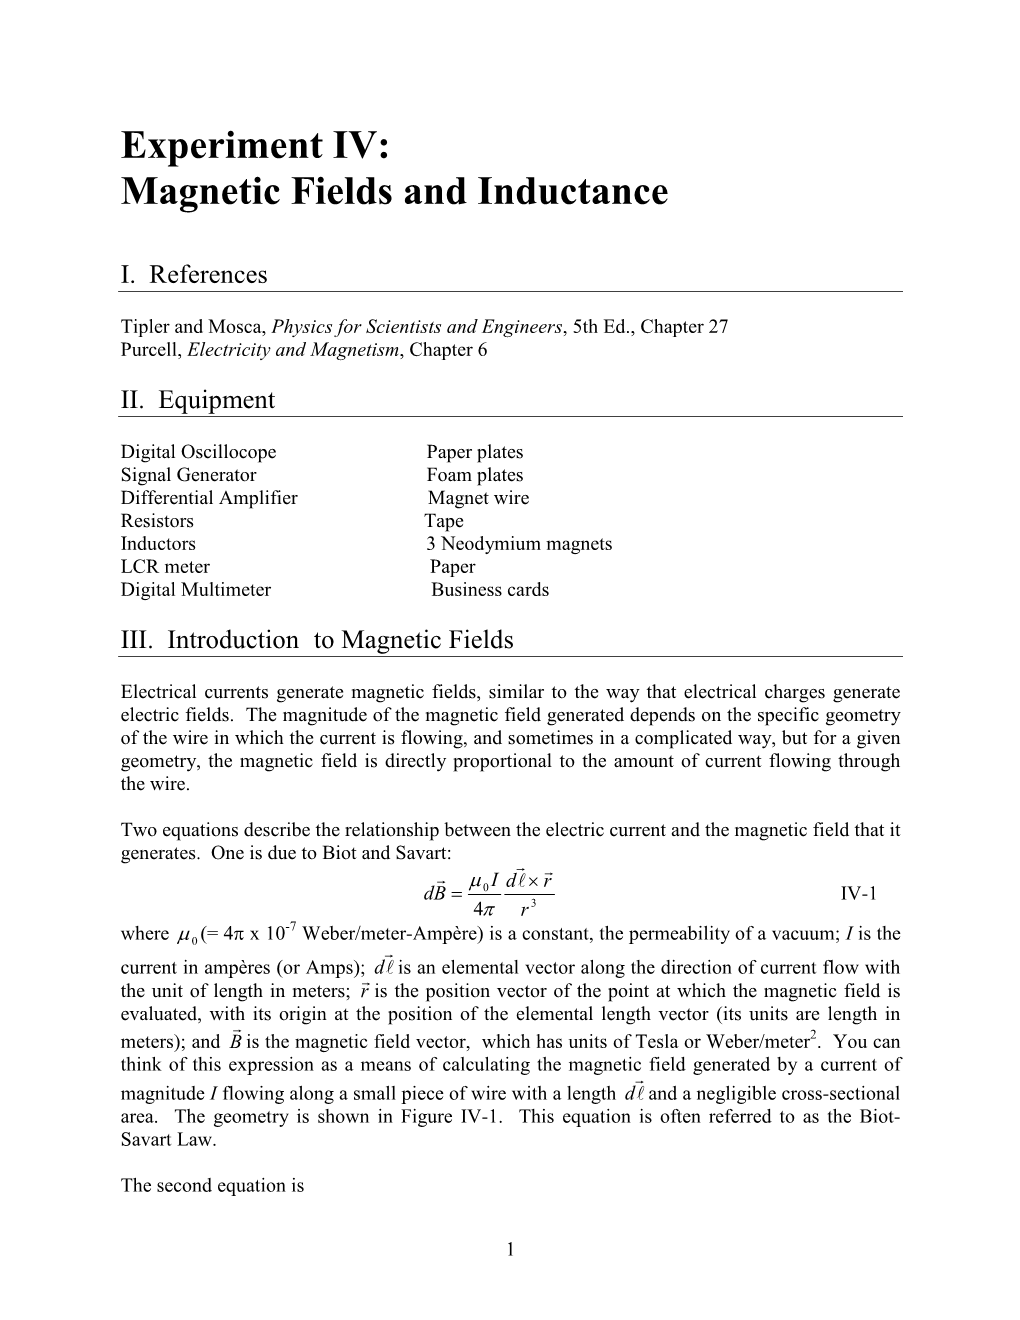 Experiment IV: Magnetic Fields and Inductance